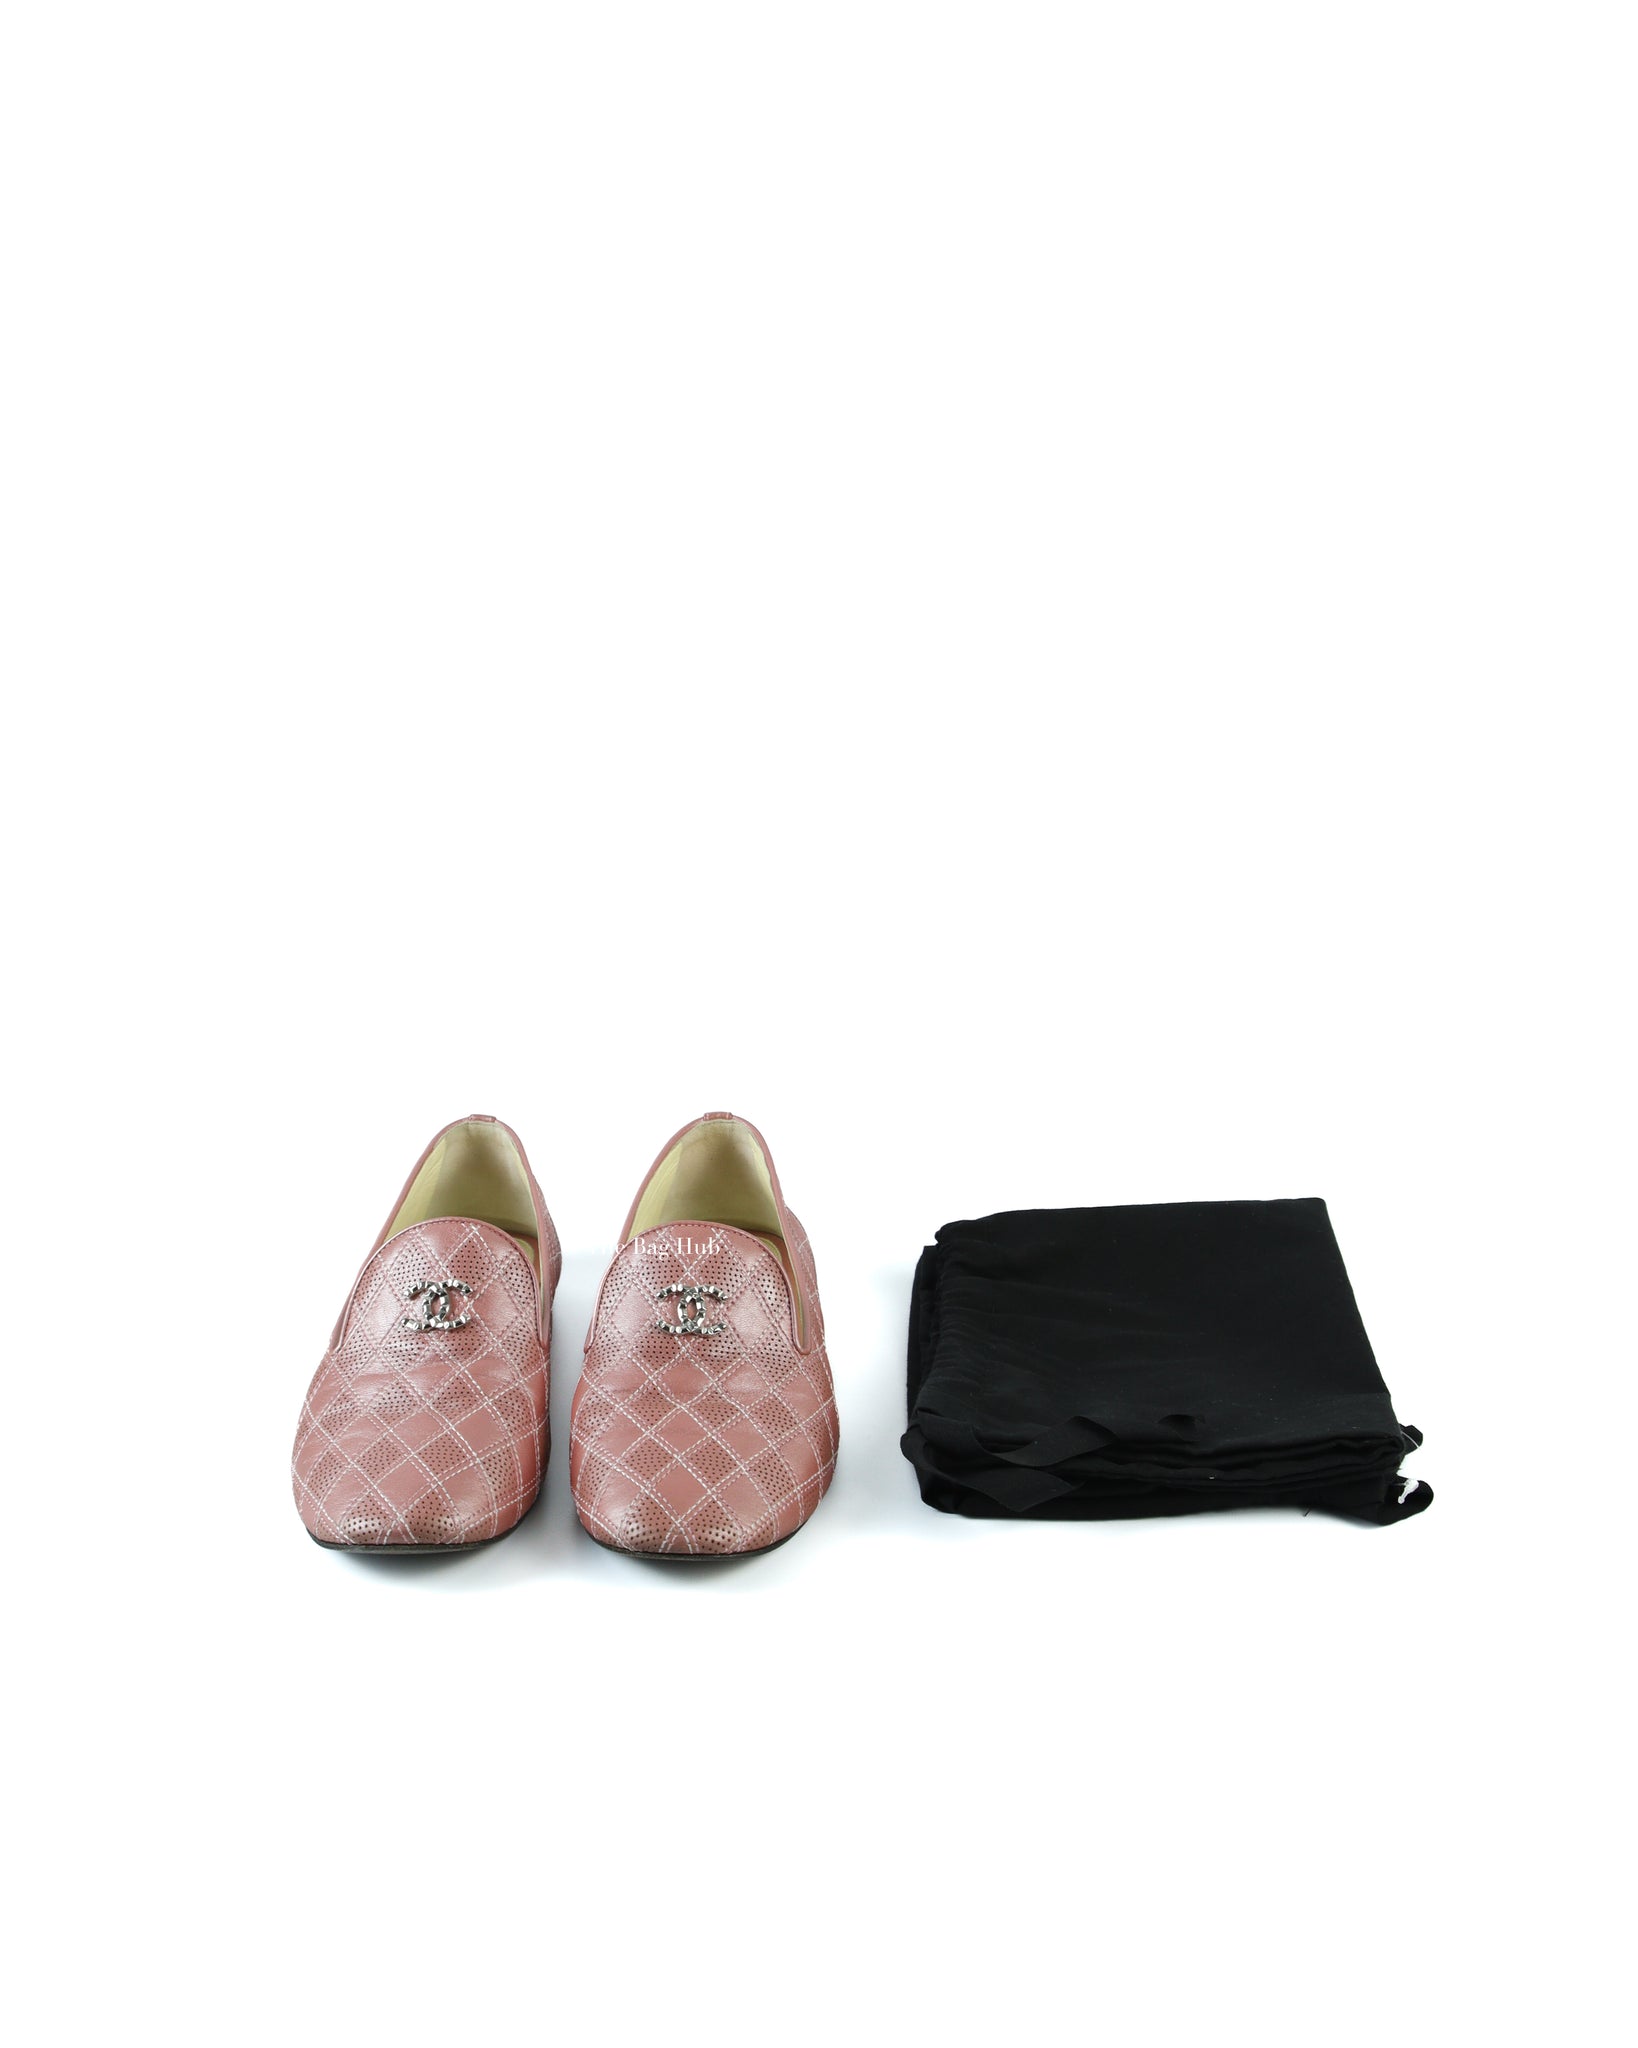 Chanel Metallic Pink Loafers 37.5 C